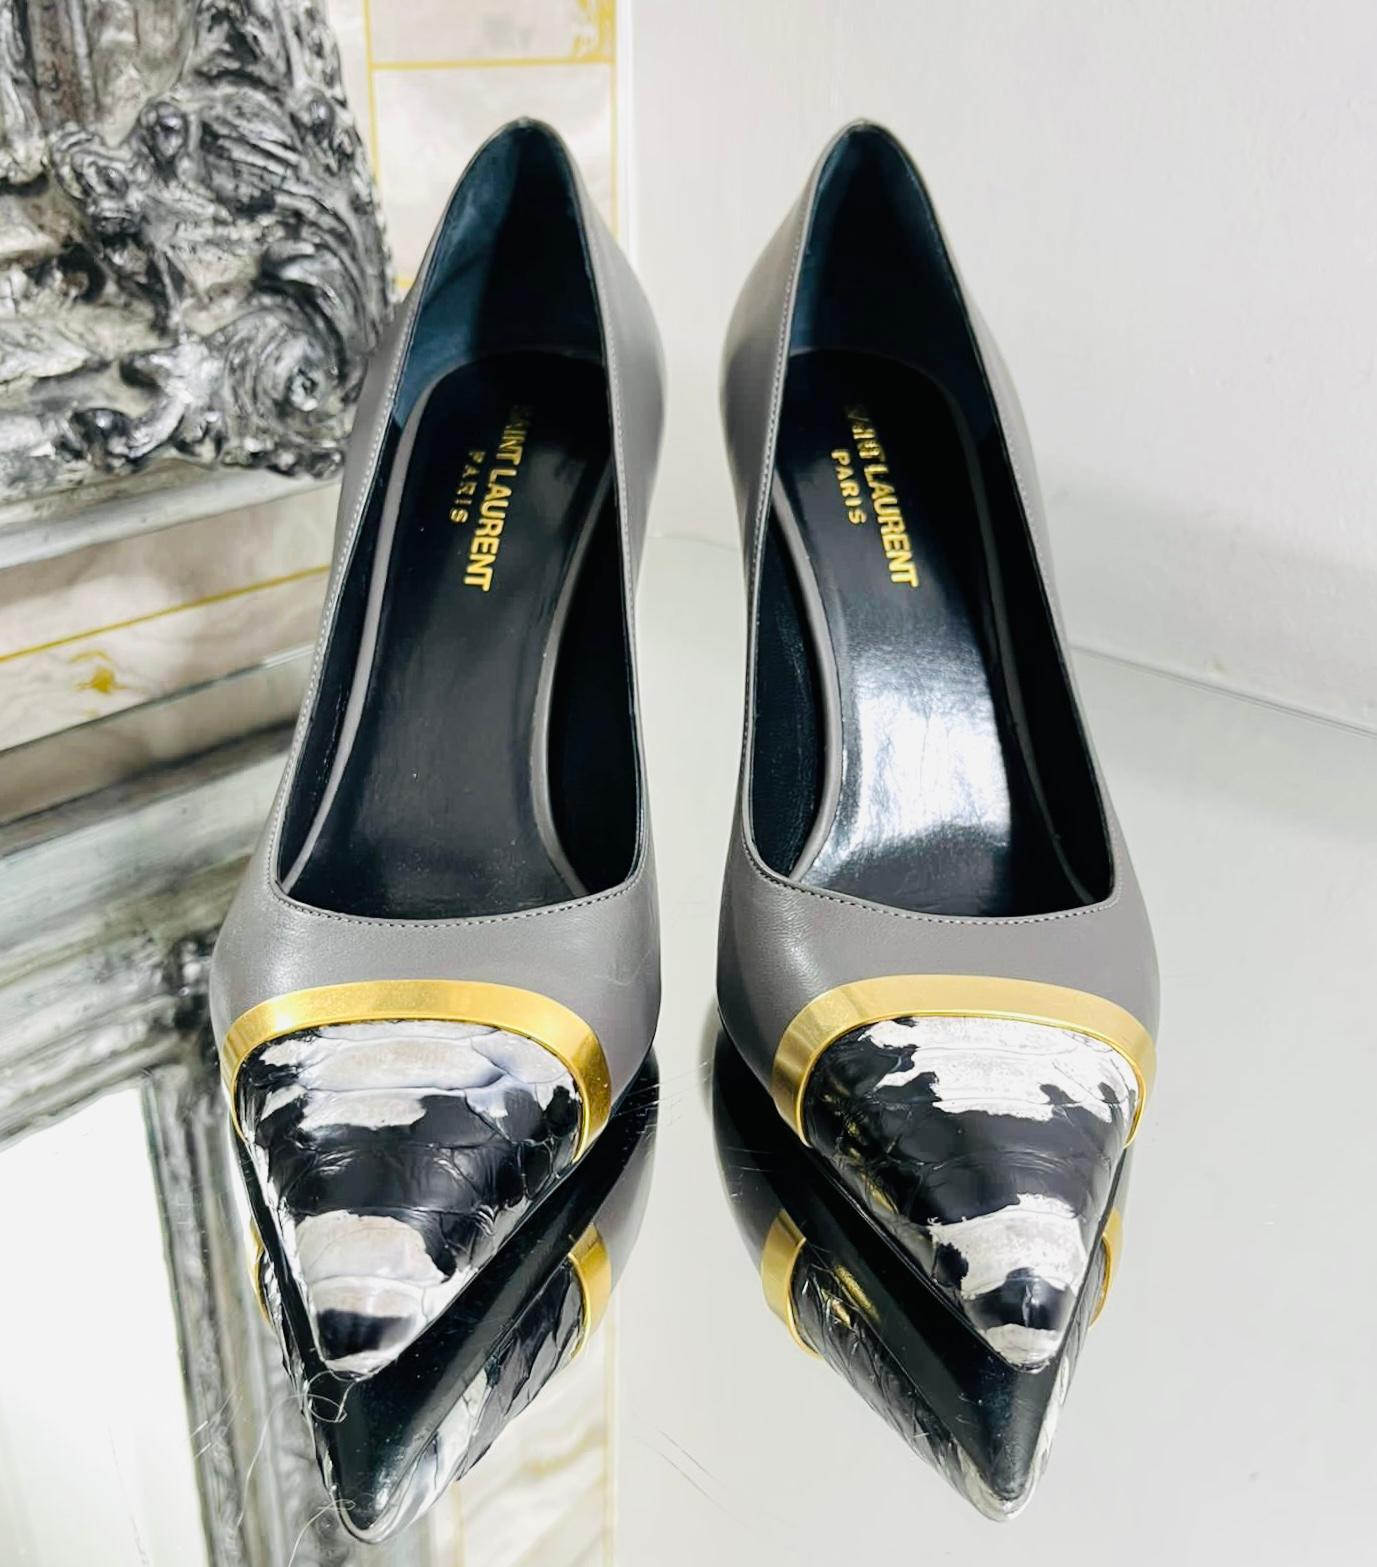 Saint Laurent Python Skin & Leather Pumps

Grey heels designed with python toe detailed with gold metal frame.

Featuring stiletto heel and pointed toe and leather lining.

Size – 39

Condition – Very Good

Composition – Python Skin, Leather